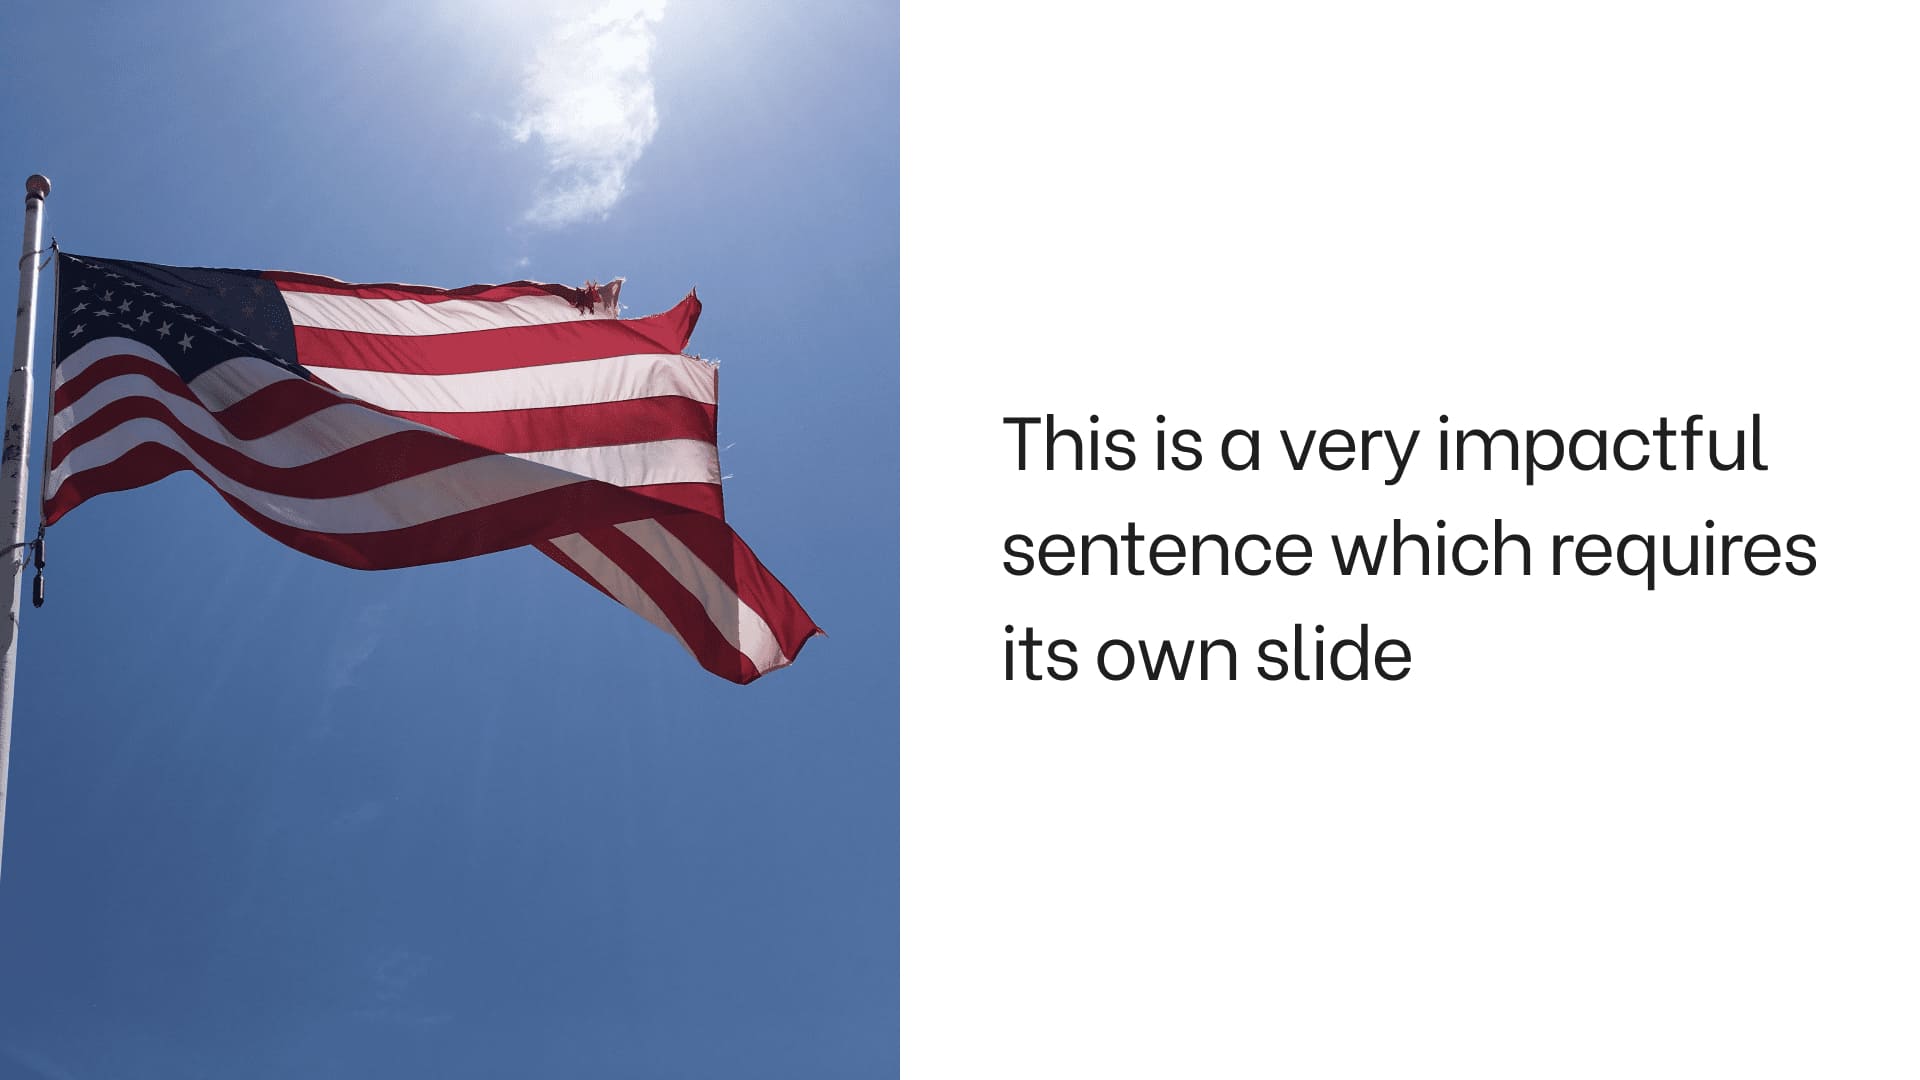 USA flag on a cloudless sky background.